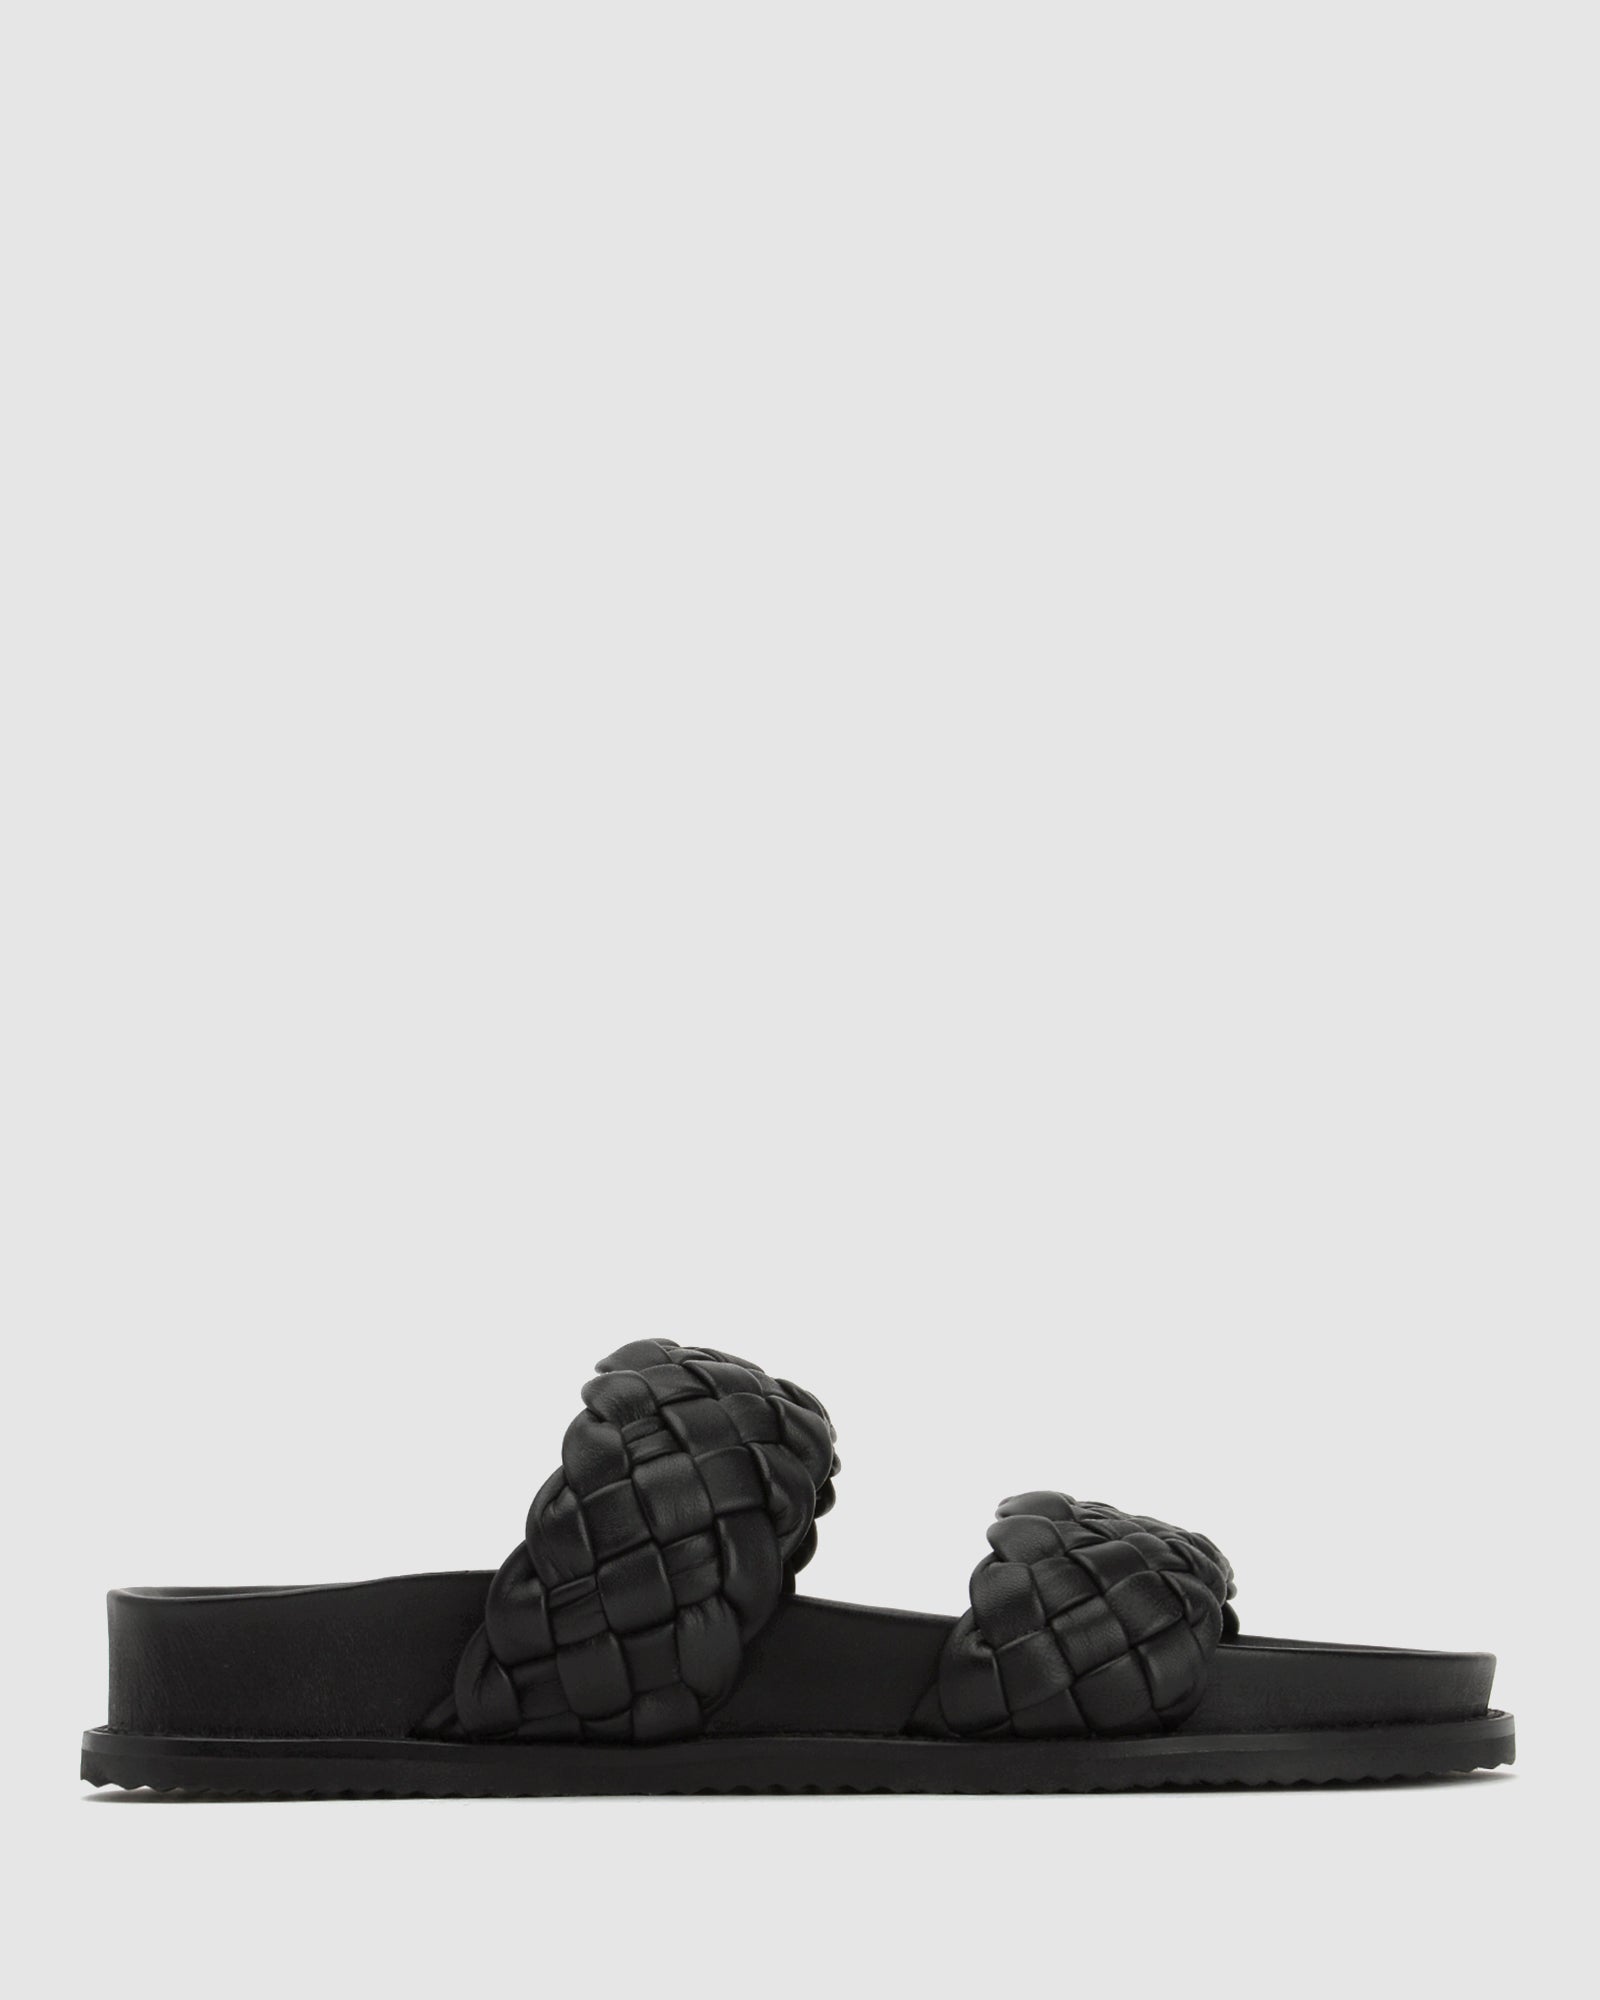 Buy ARI Woven Leather Slides by Betts online - Betts